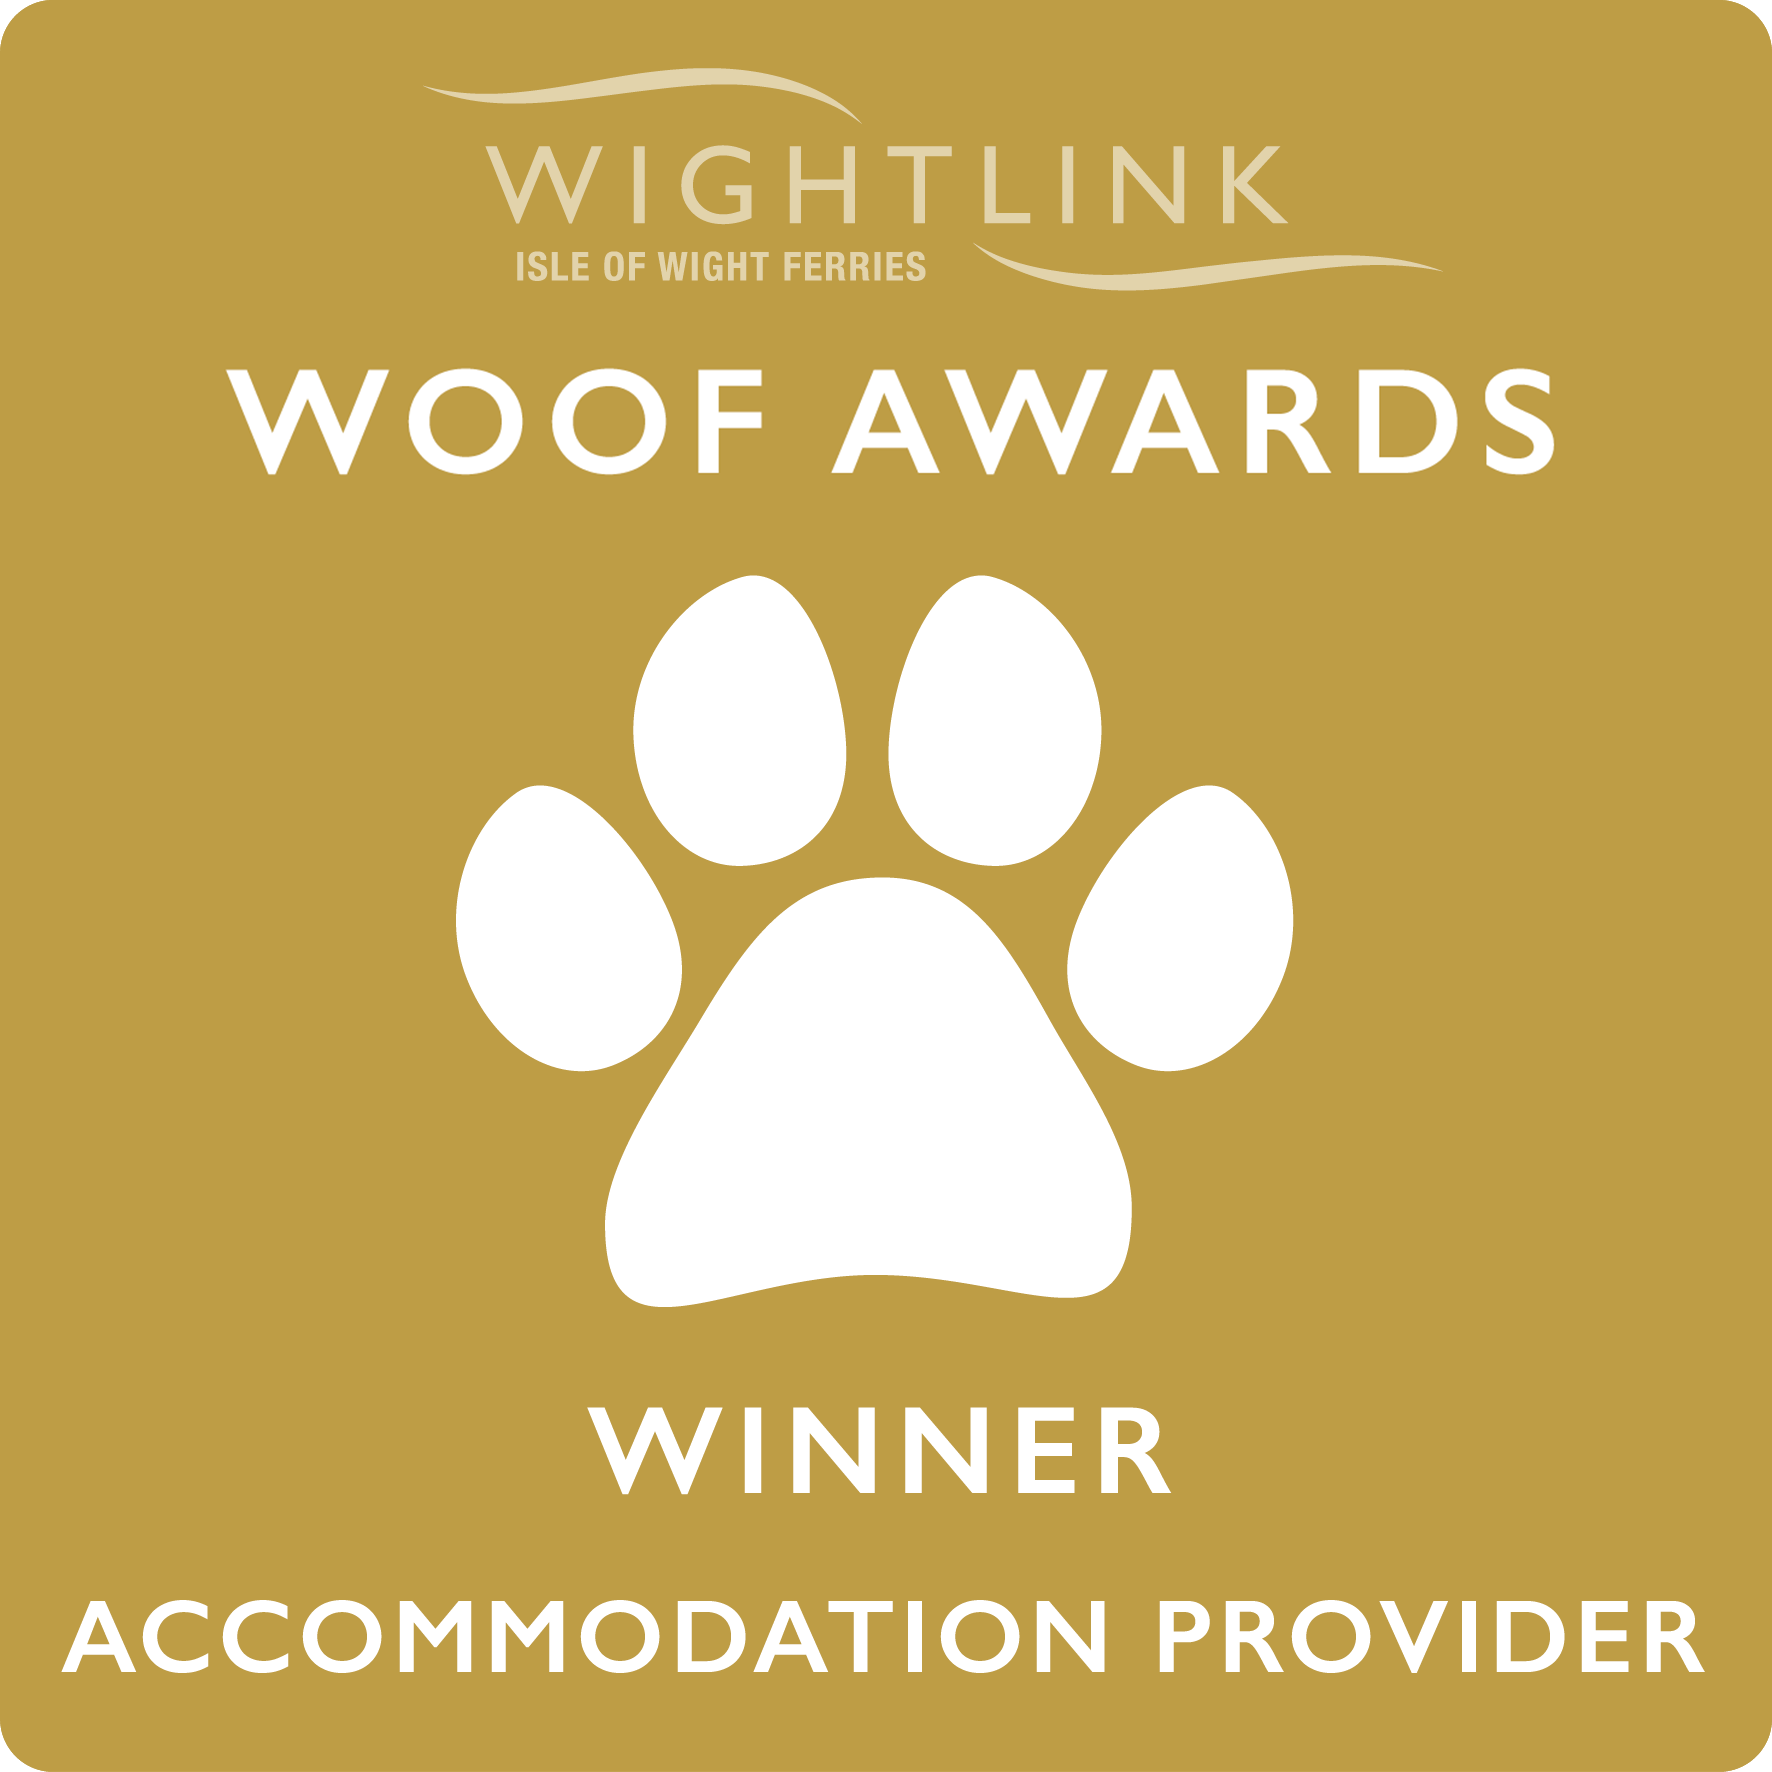 Best Isle of Wight Dog Friendly Accommodation, Luccombe Manor Country House Hotel, Isle of Wight